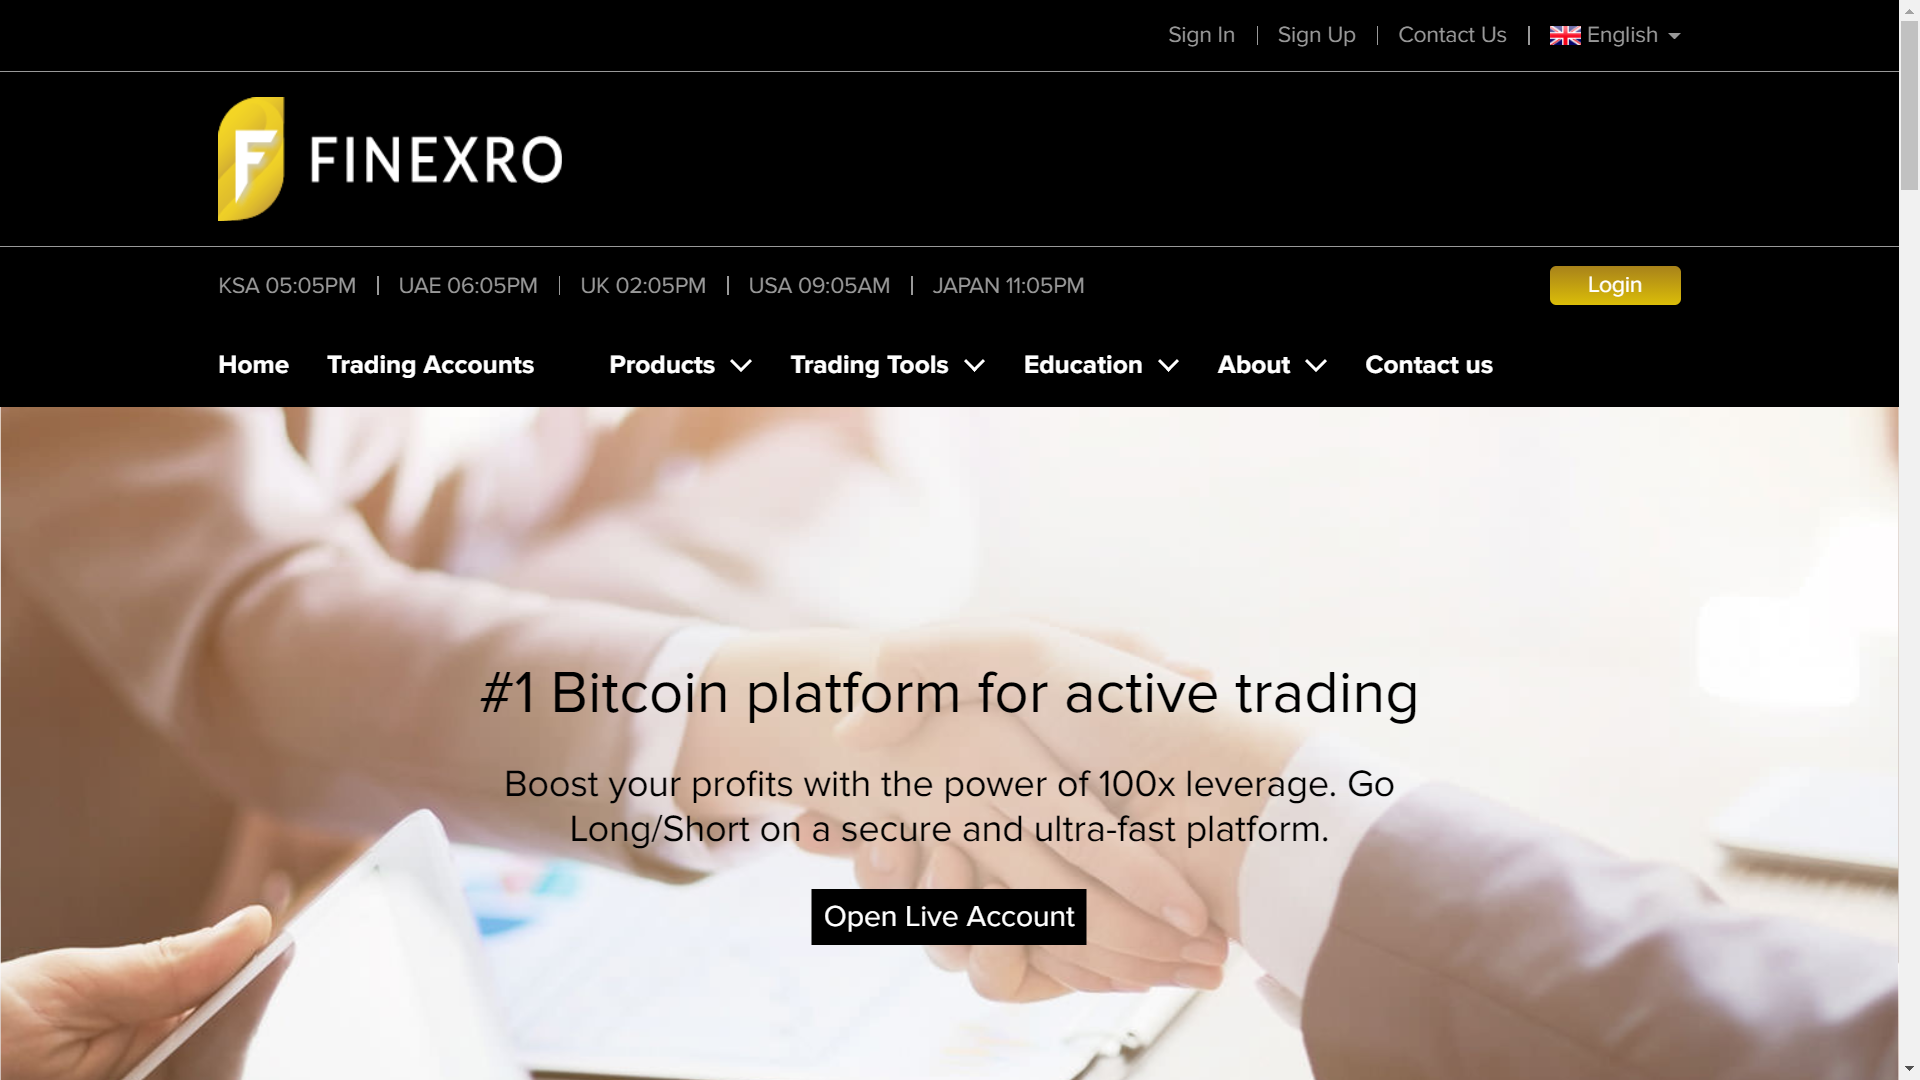 Finexro Review: The Features of Finexro That Impress All Traders